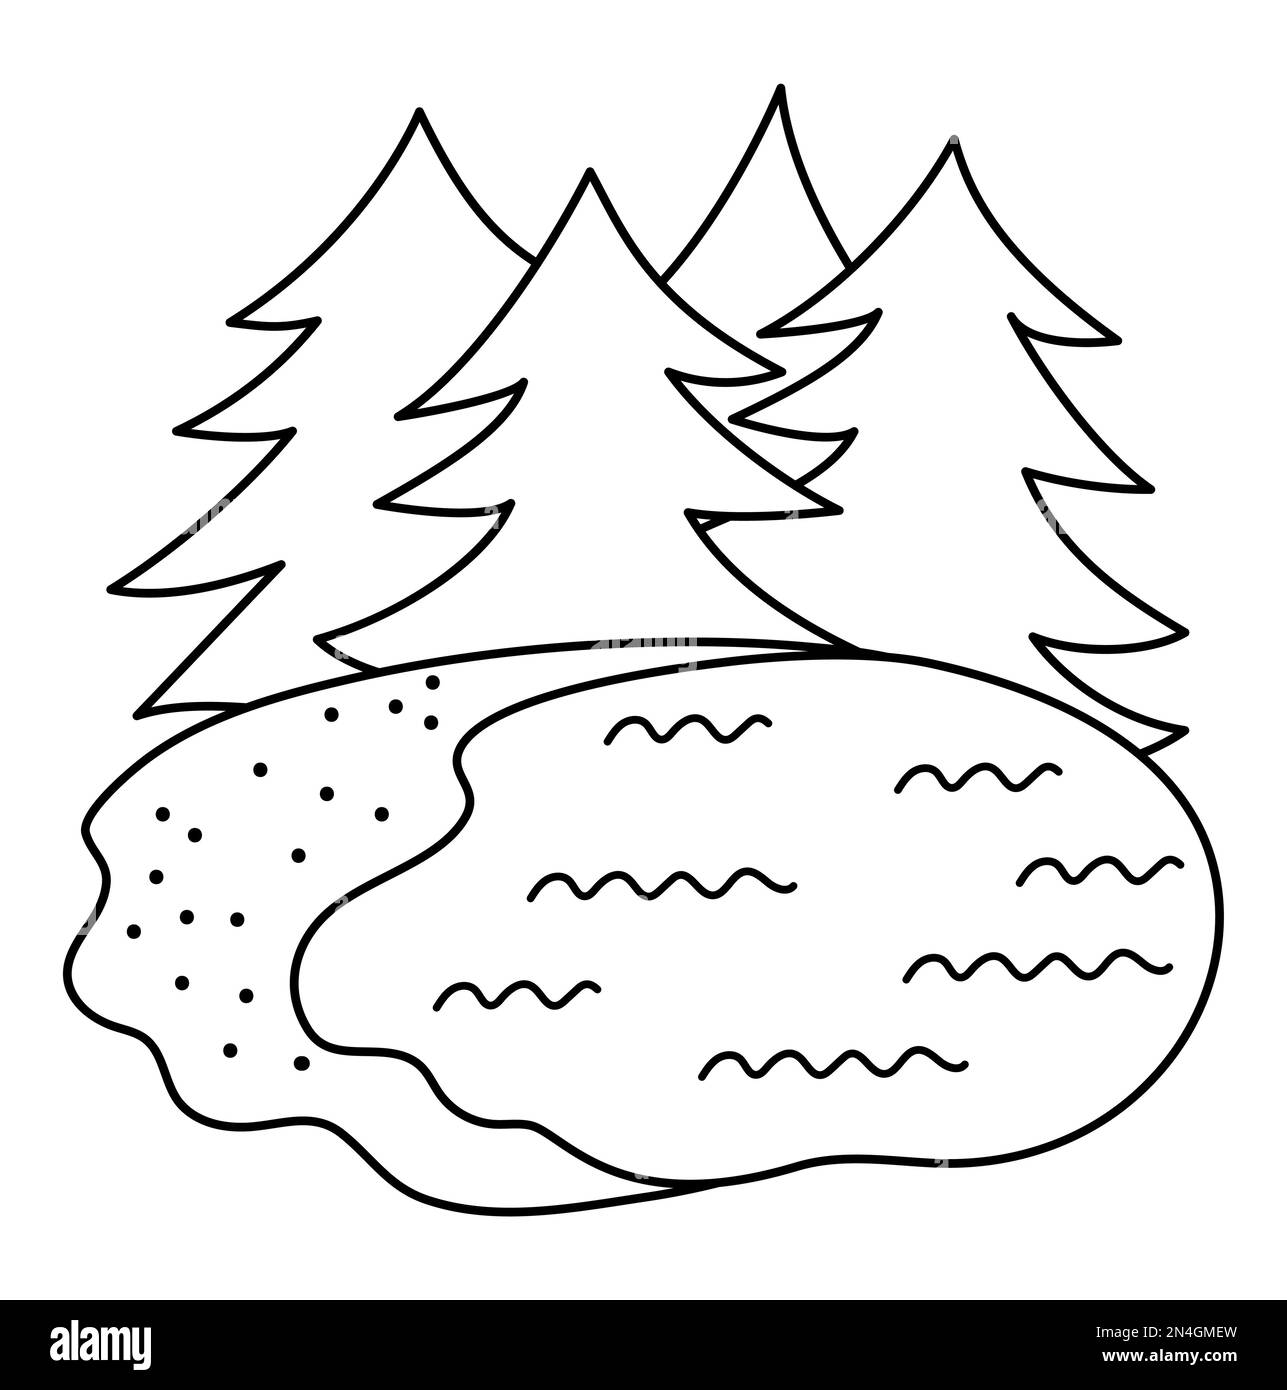 Forest black and white scene with fir trees and lake. Vector outline woodland illustration. Active holidays, camping or local tourism landscape design Stock Vector